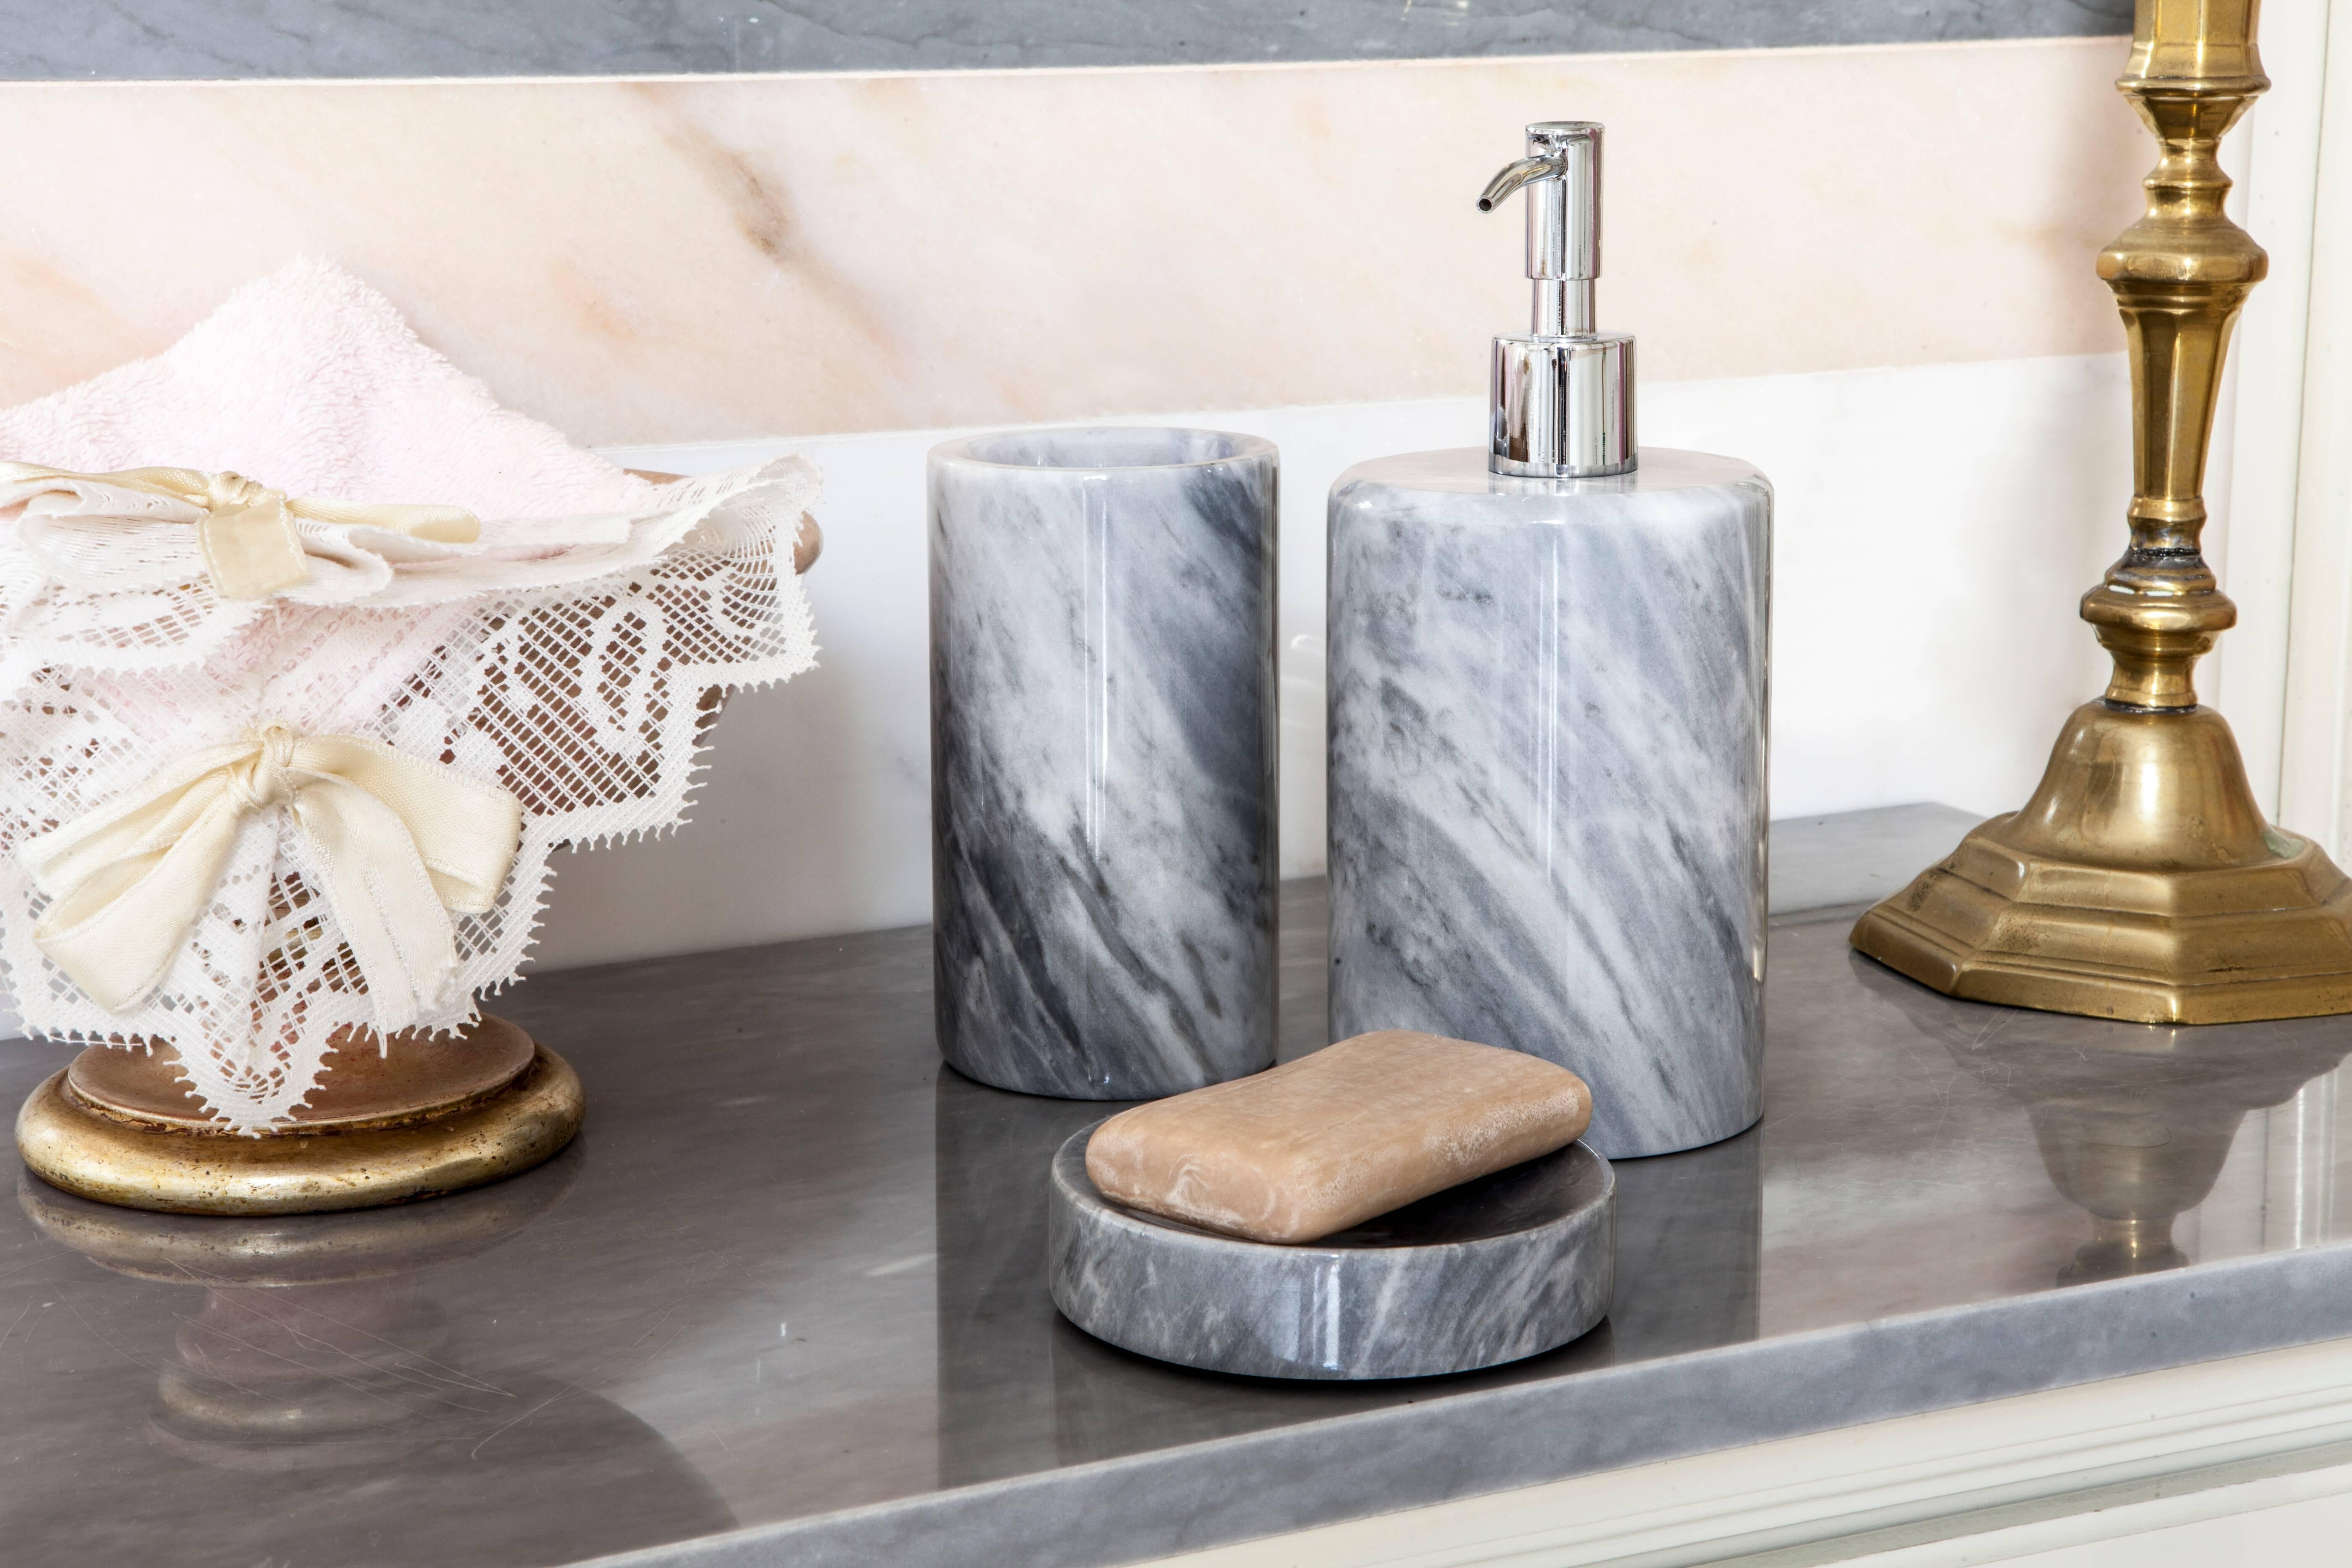 A rounded shape toothbrush holder in grey marble.
Each piece is in a way unique (since each marble block is different in veins and shades) and handcrafted in Italy. Slight variations in shape, color and size are to be considered a guarantee of an